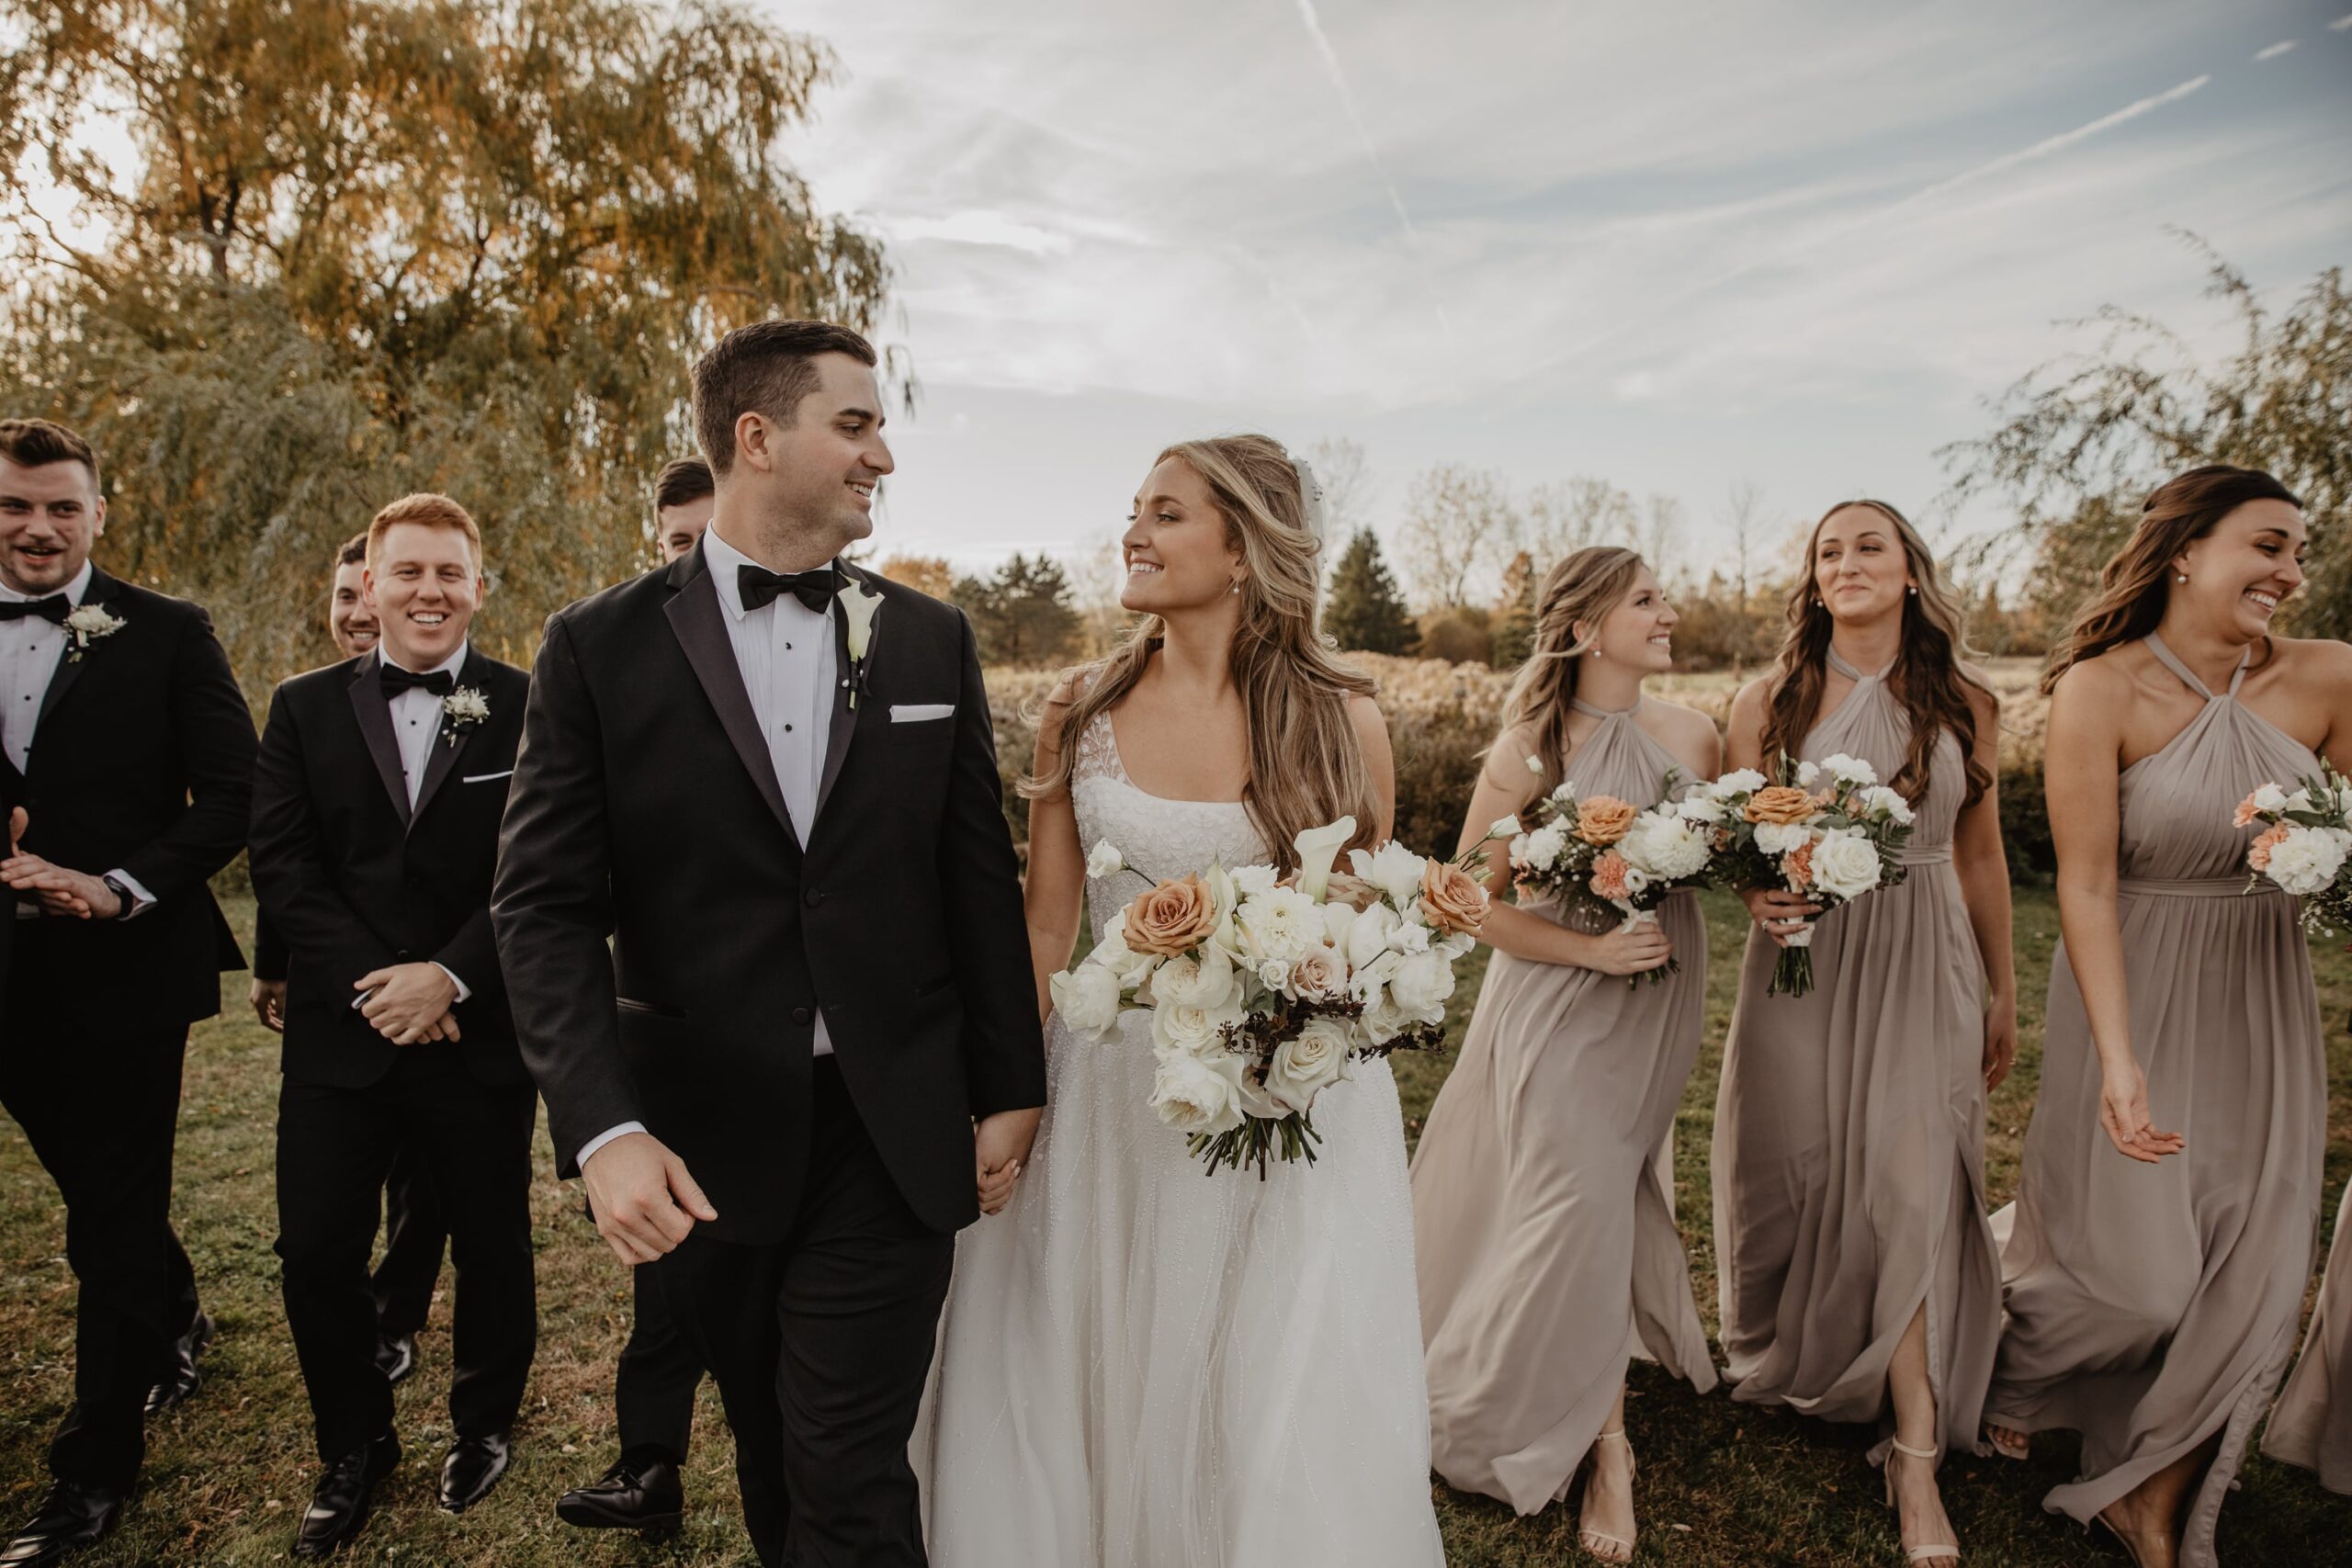 Newlywed husband and wife walk with their wedding party at The Sterling wedding venue, photographed by Buffalo Wedding Photographer Jessy Herman Photo